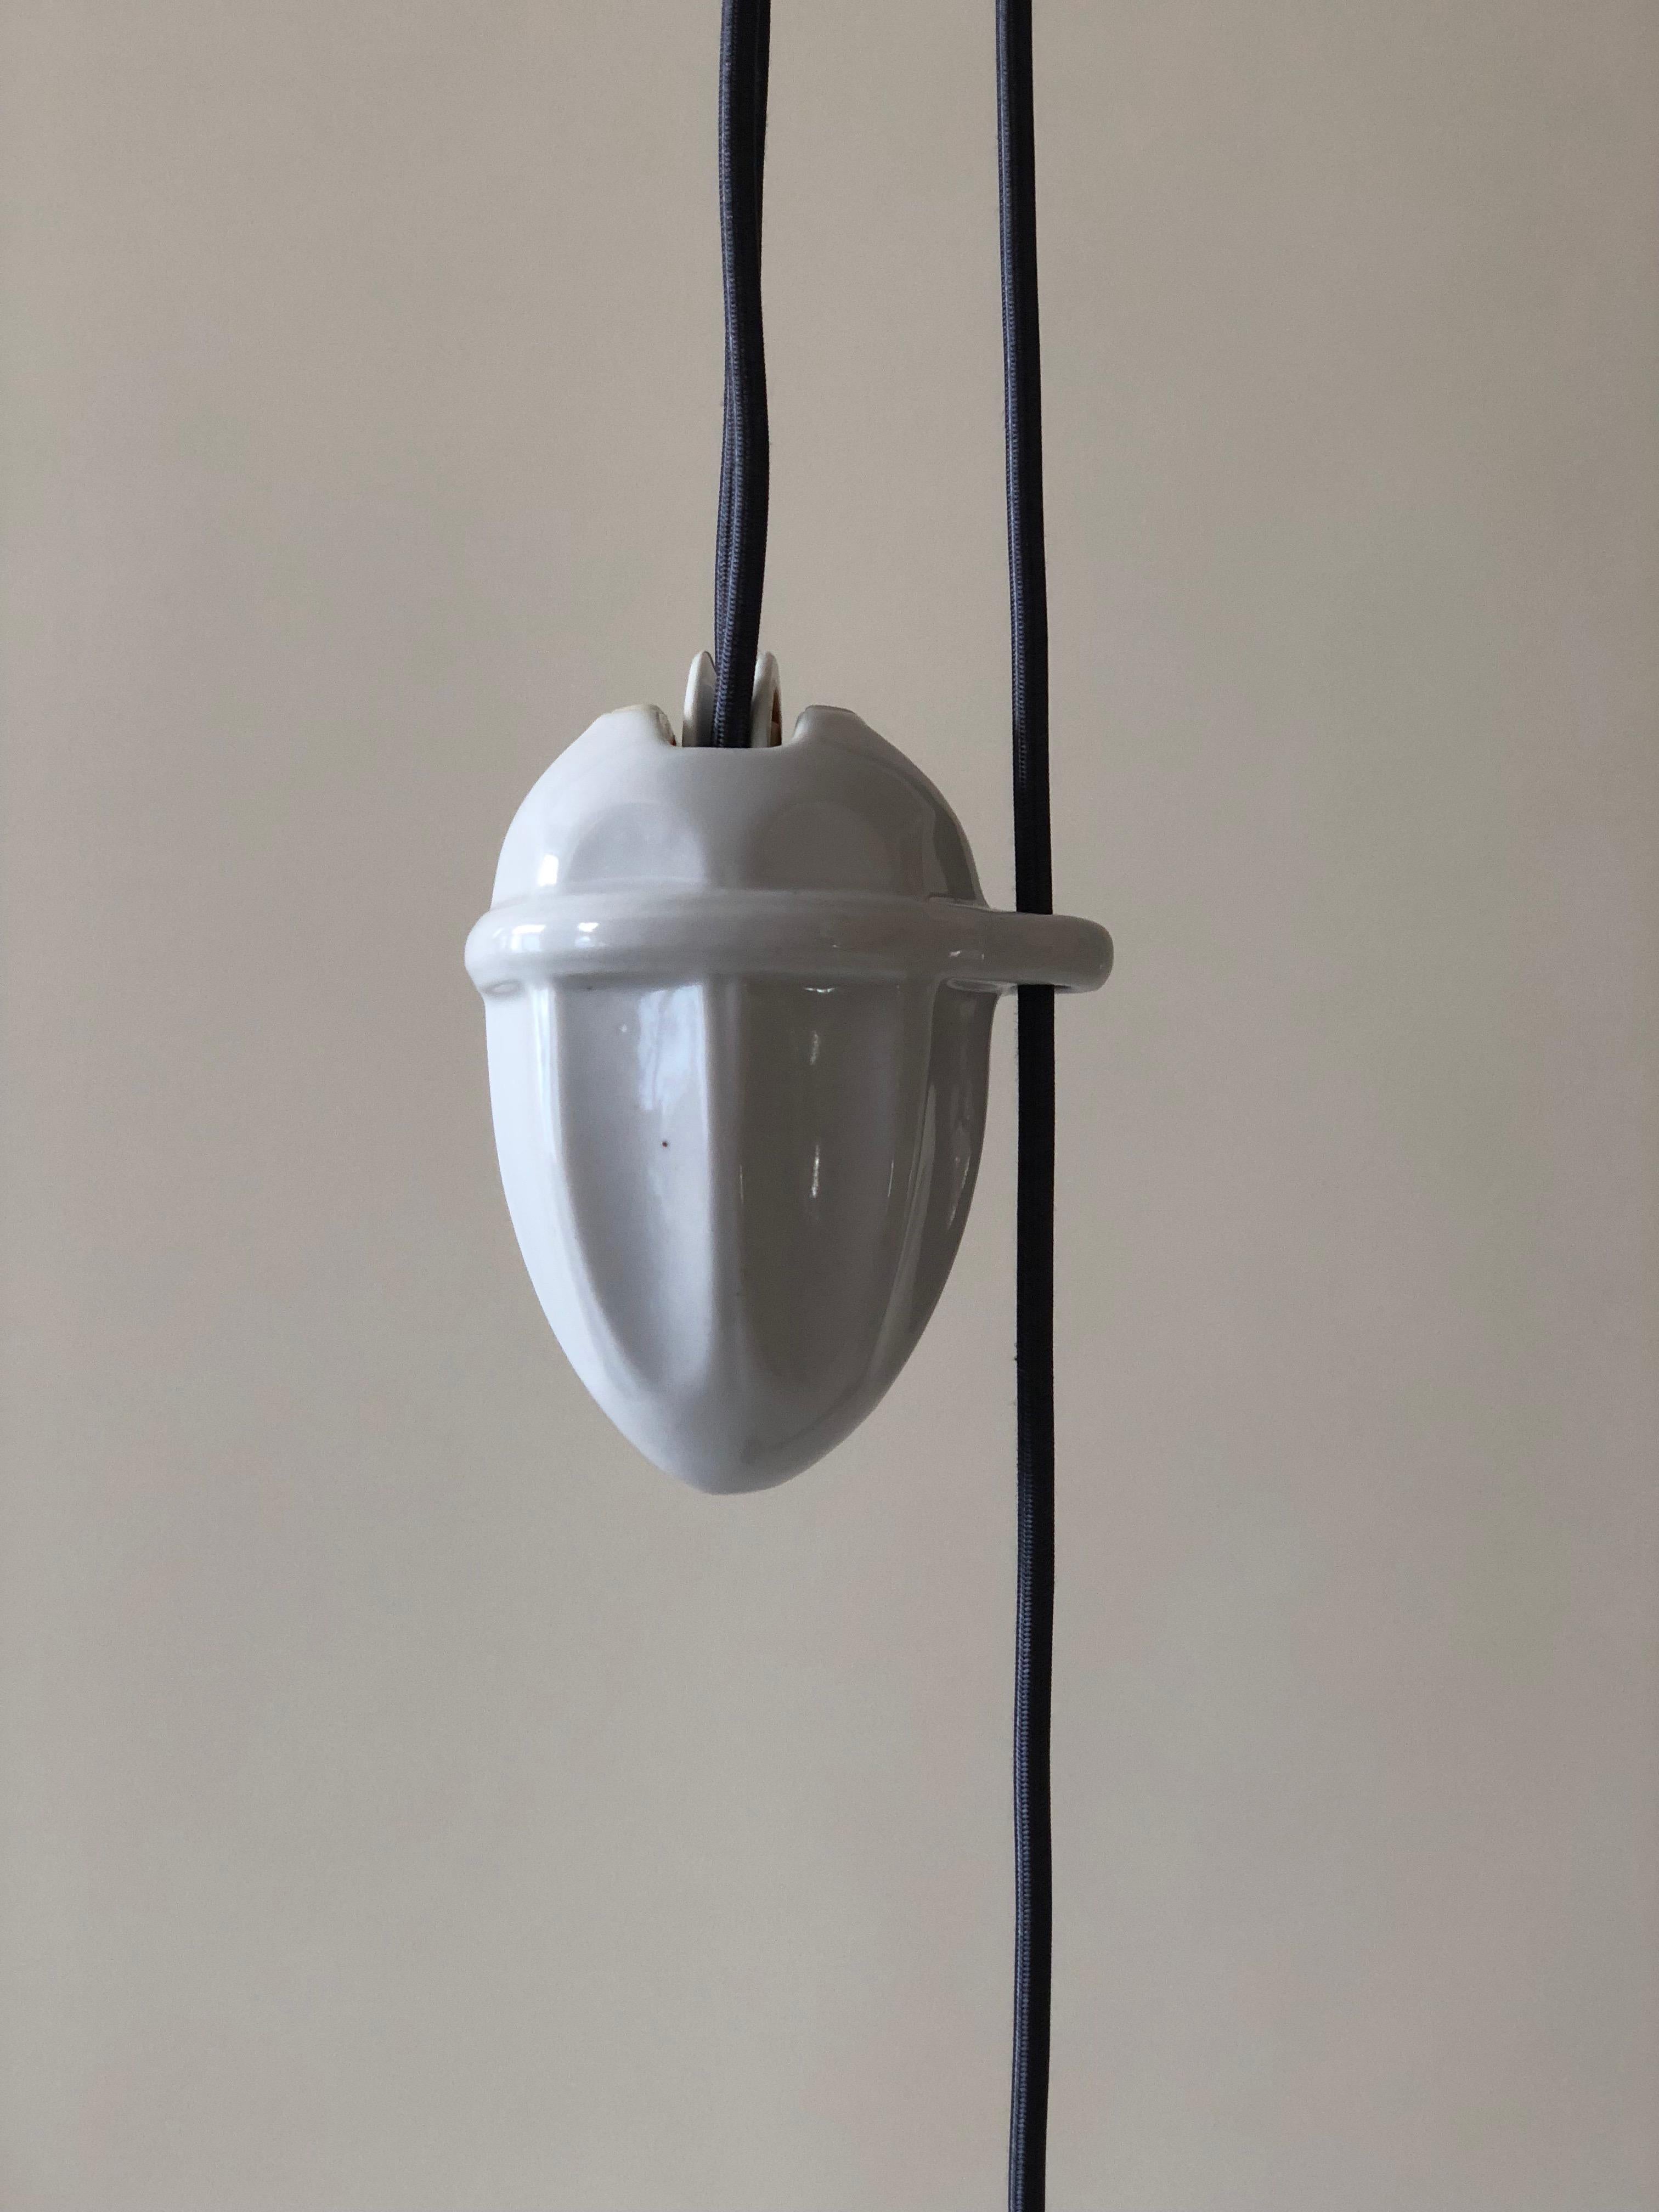 Counterweight Pendant Lamp, 1900, Made from Porcelain and Handmade Glass In Fair Condition For Sale In Vienna, Austria